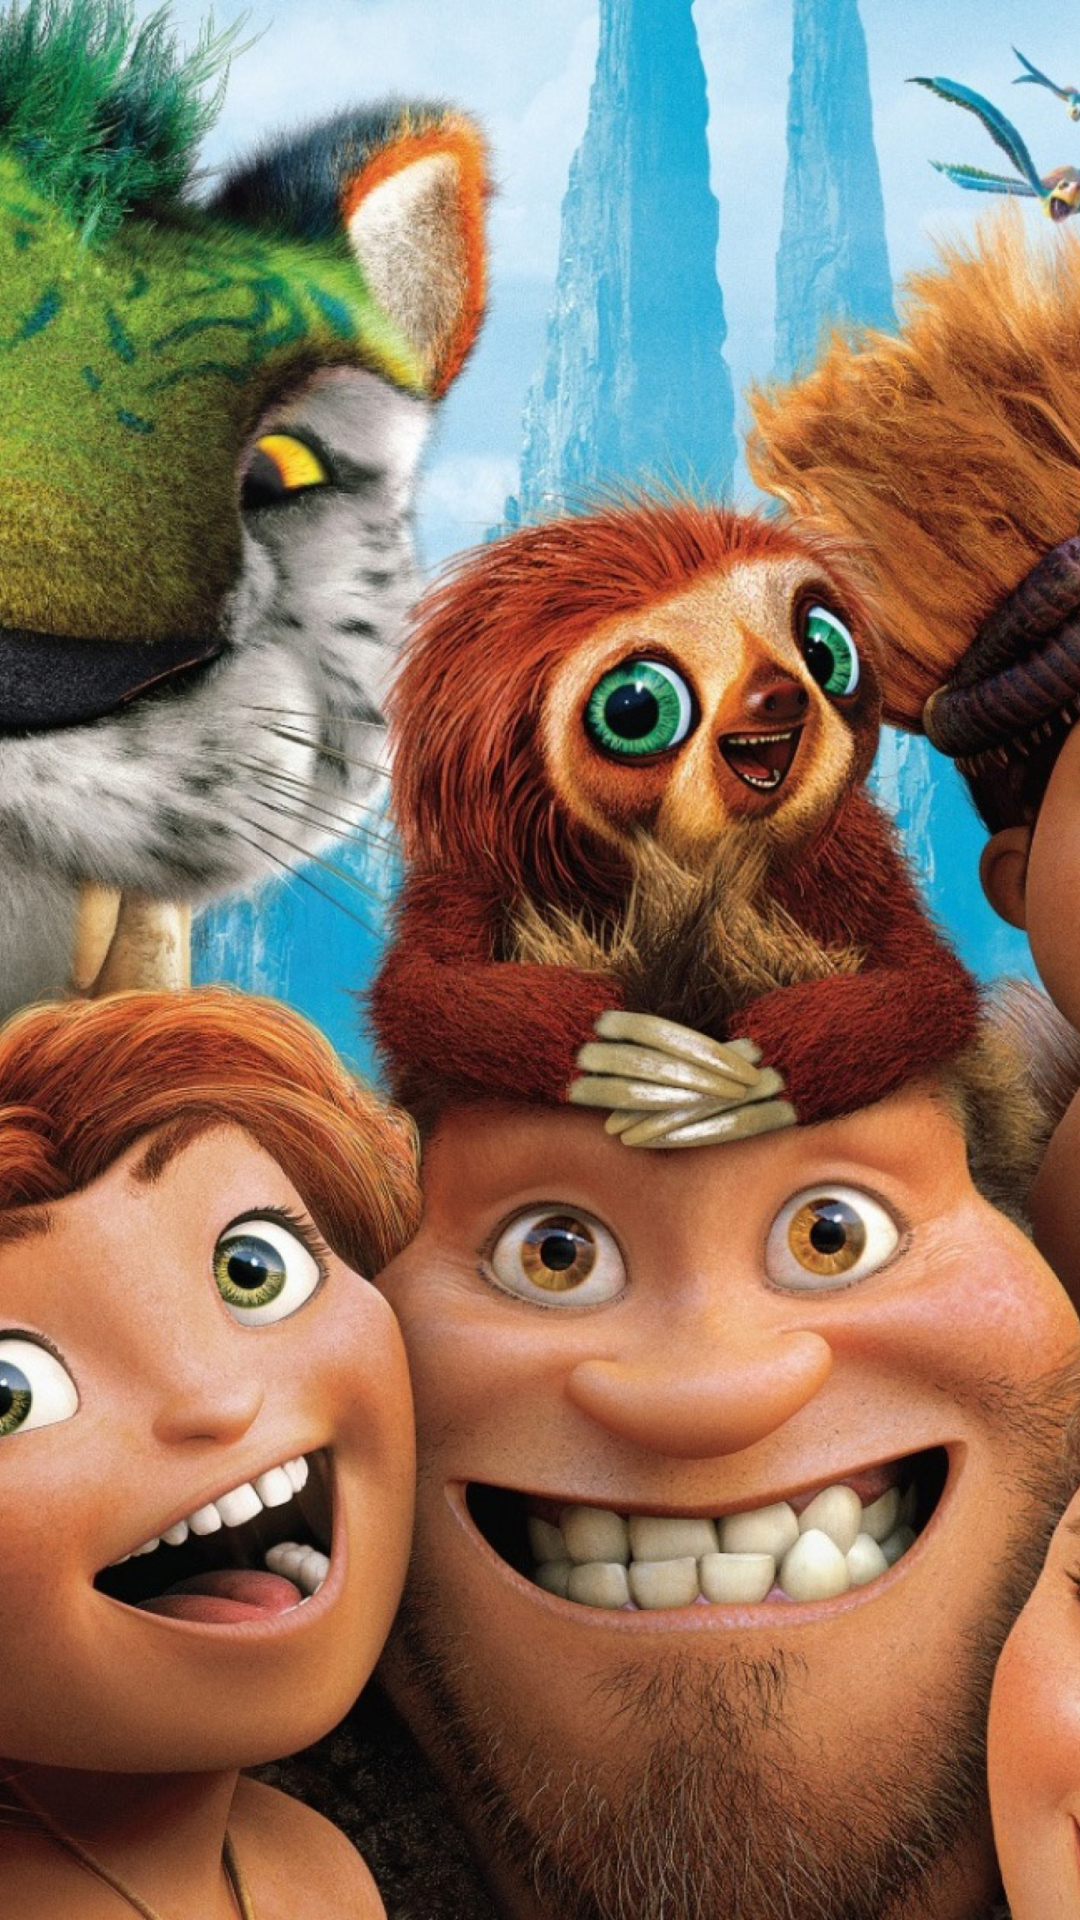 The Croods Wallpaper For